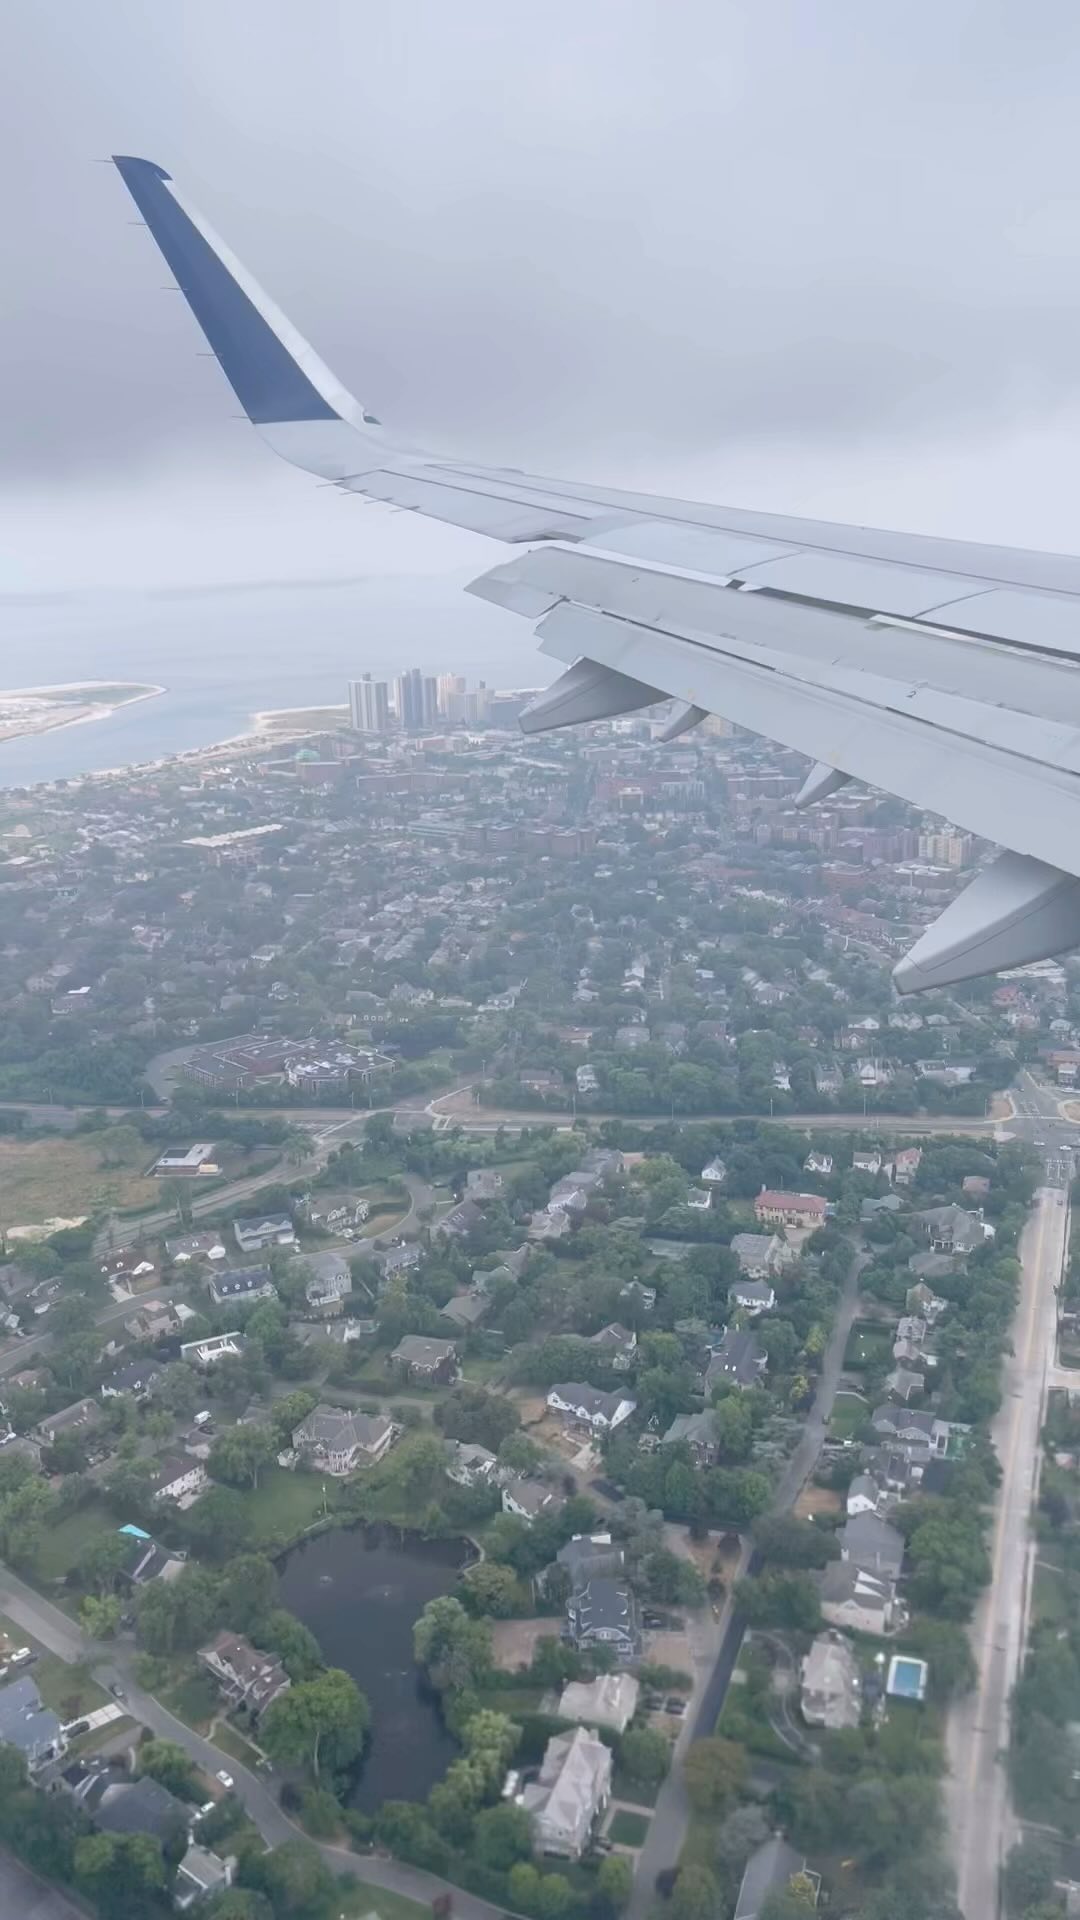 Arriving in New York, the airport is far from the city so you don't see anything iconic